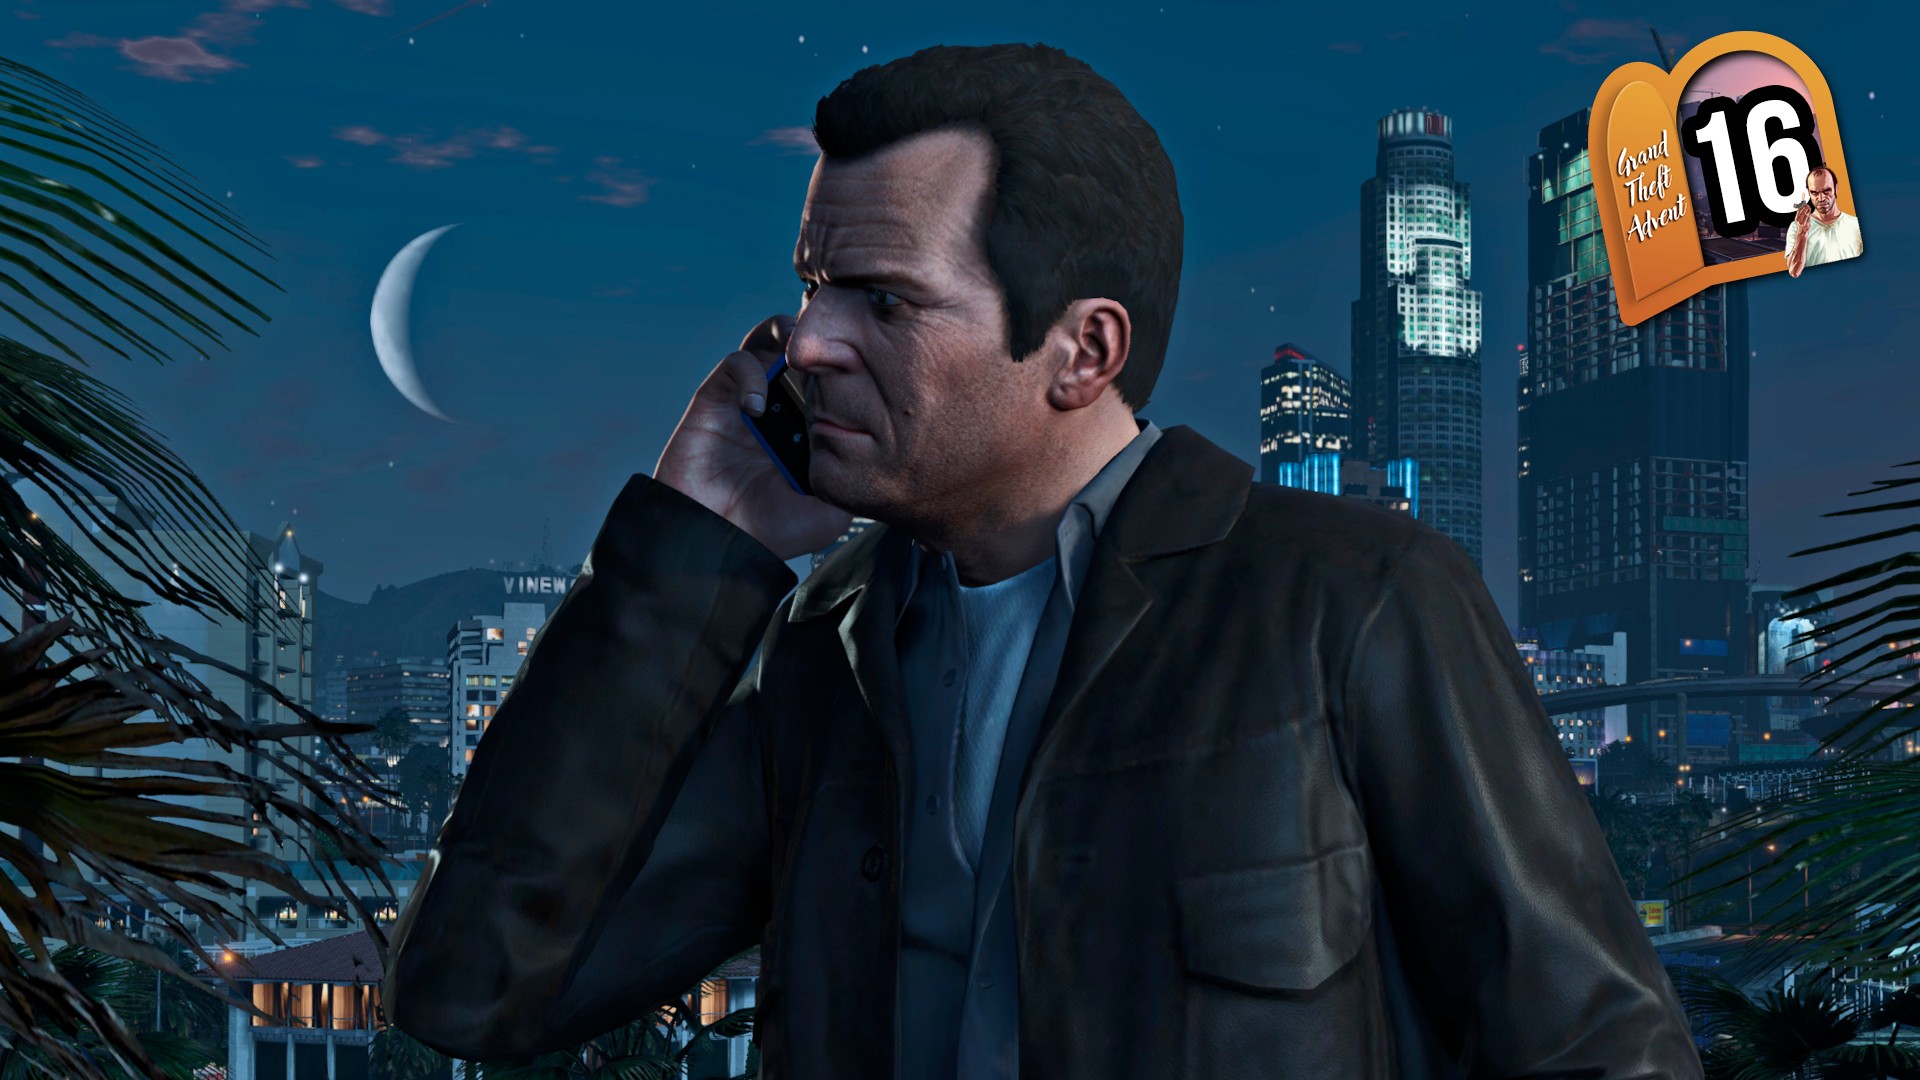 Celebrate Ten Years of Grand Theft Auto V 